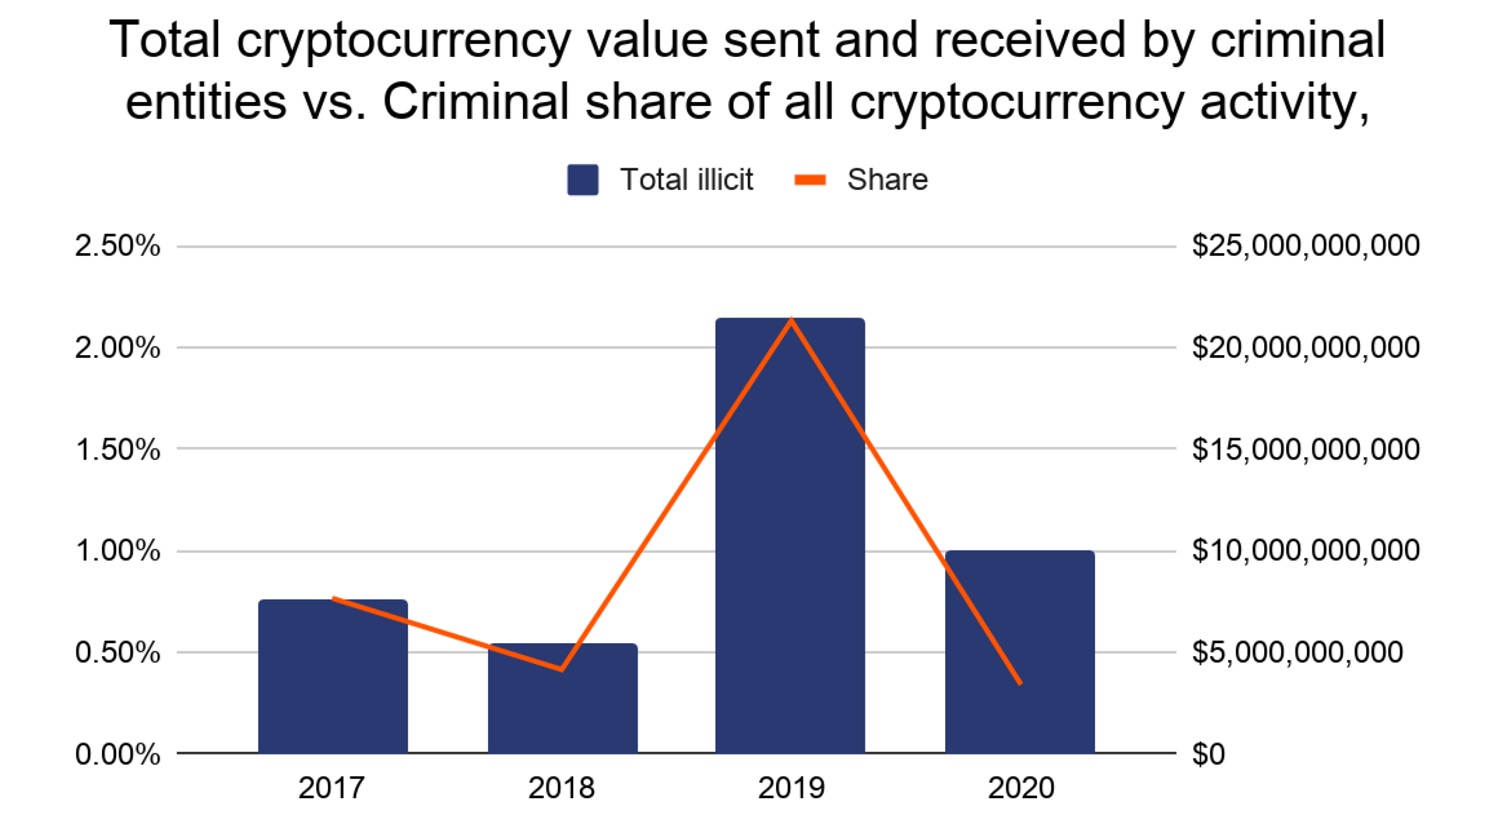 Crypto Crime Fell Sharply to Only 0.3% of All Cryptocurrency Activity in 2020